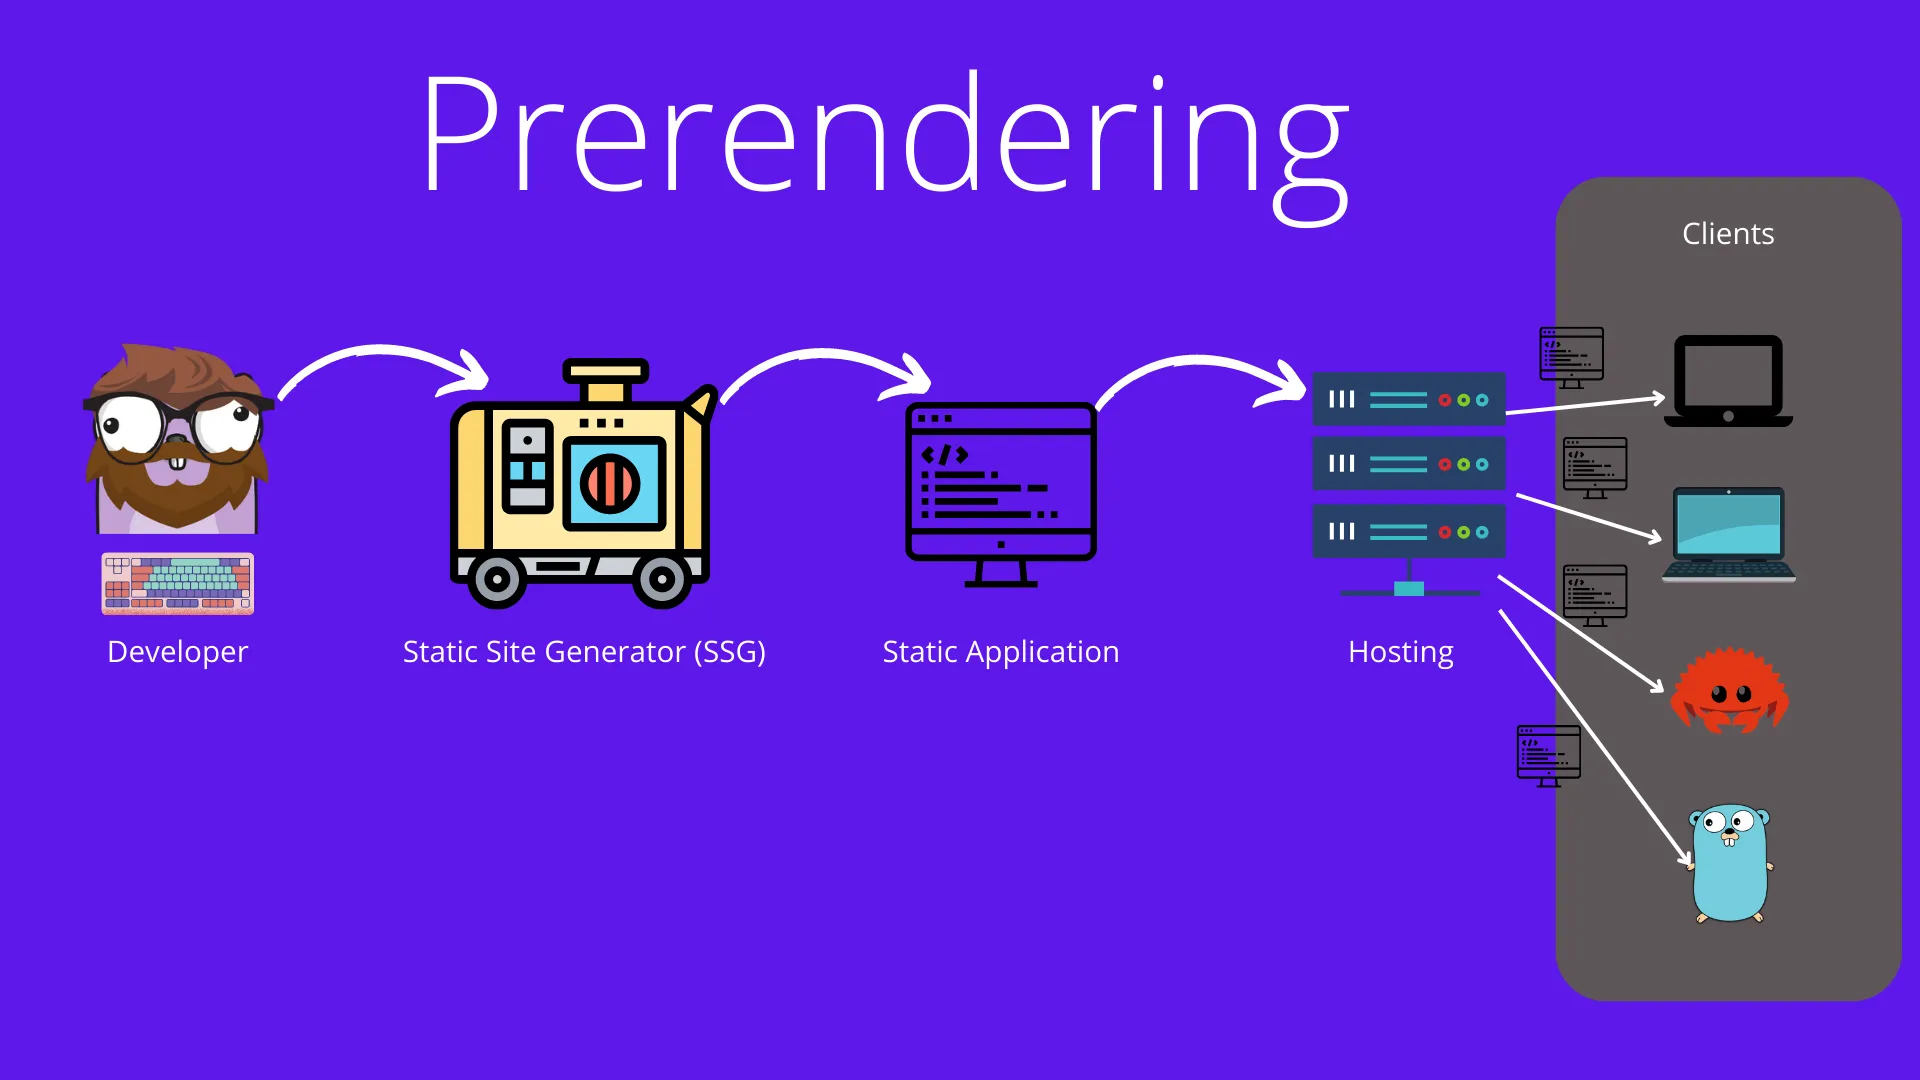 Prerendering is when a static site generator creates a static site that gets served as its stored